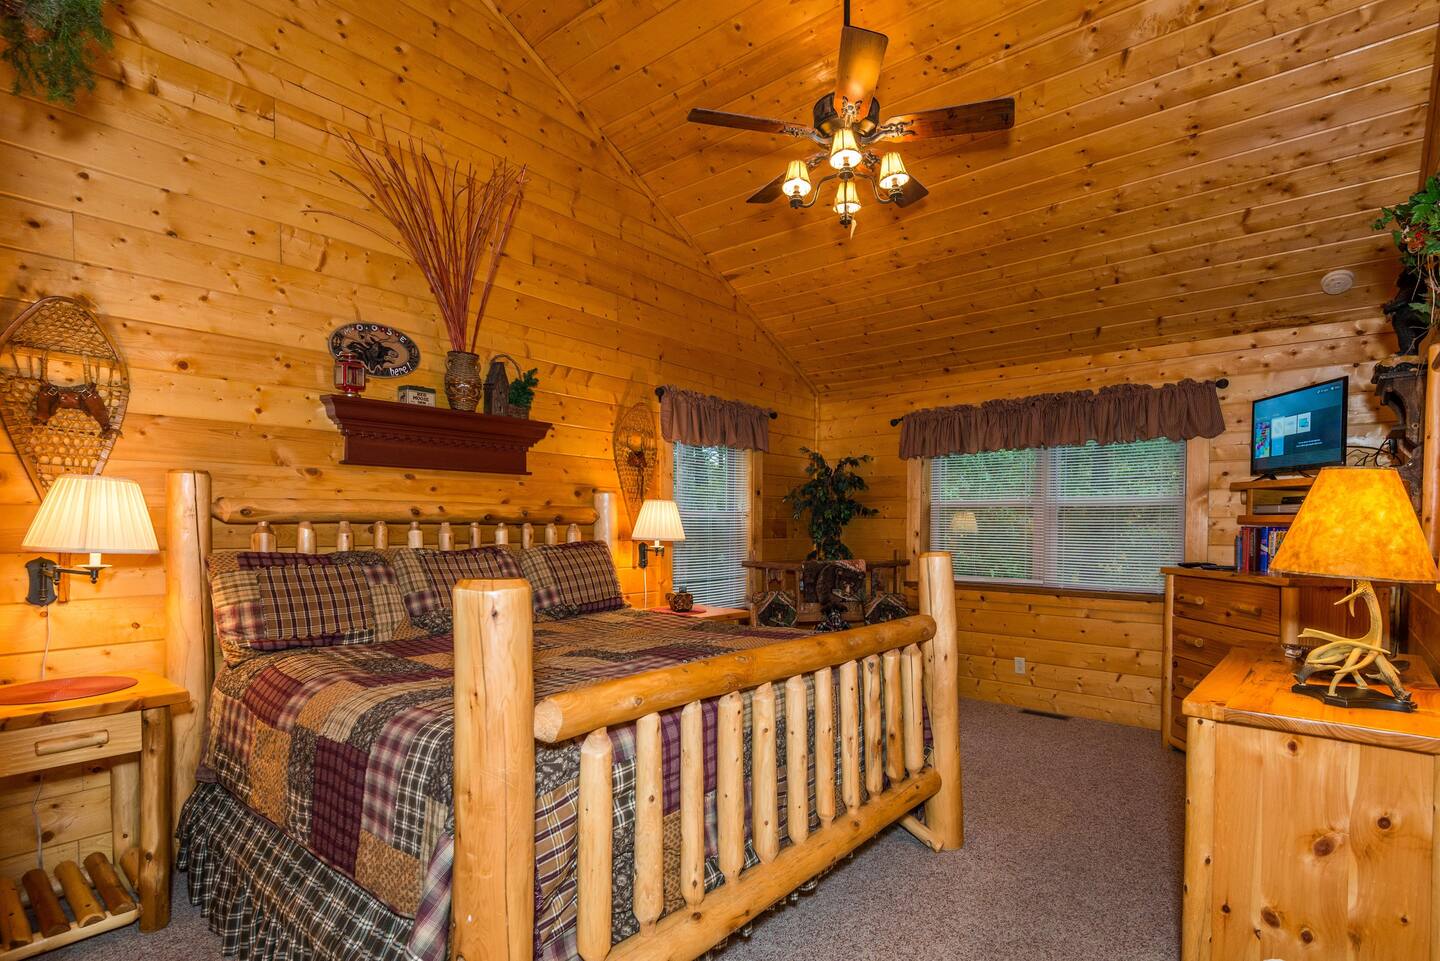 Fairytale Log Cabin second bedroom with queen sized bed